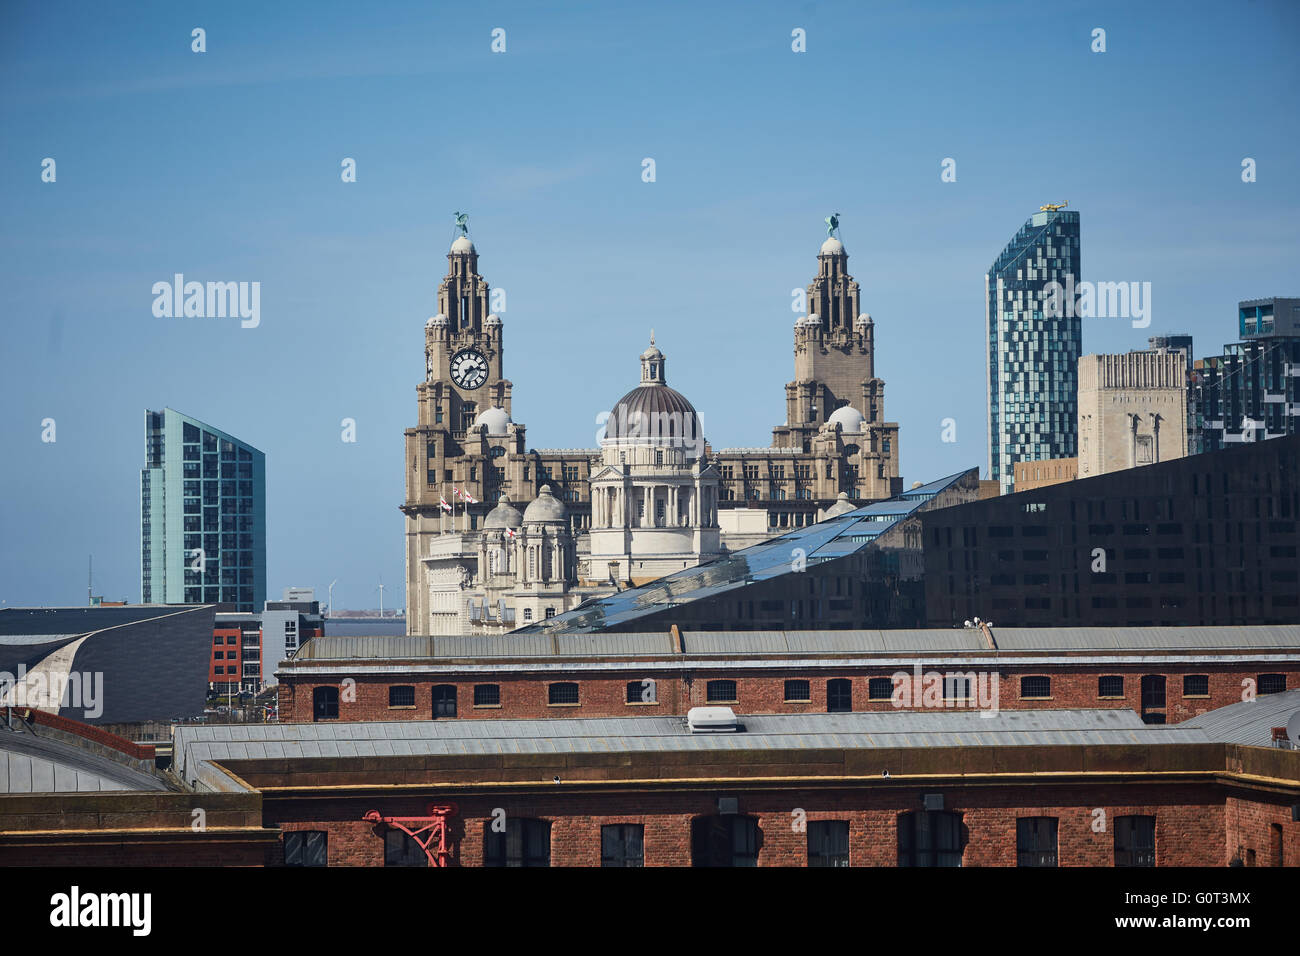 Liverpool albert dock buildings liver building    The Royal Liver Building is a Grade I listed building in Liverpool, England. I Stock Photo